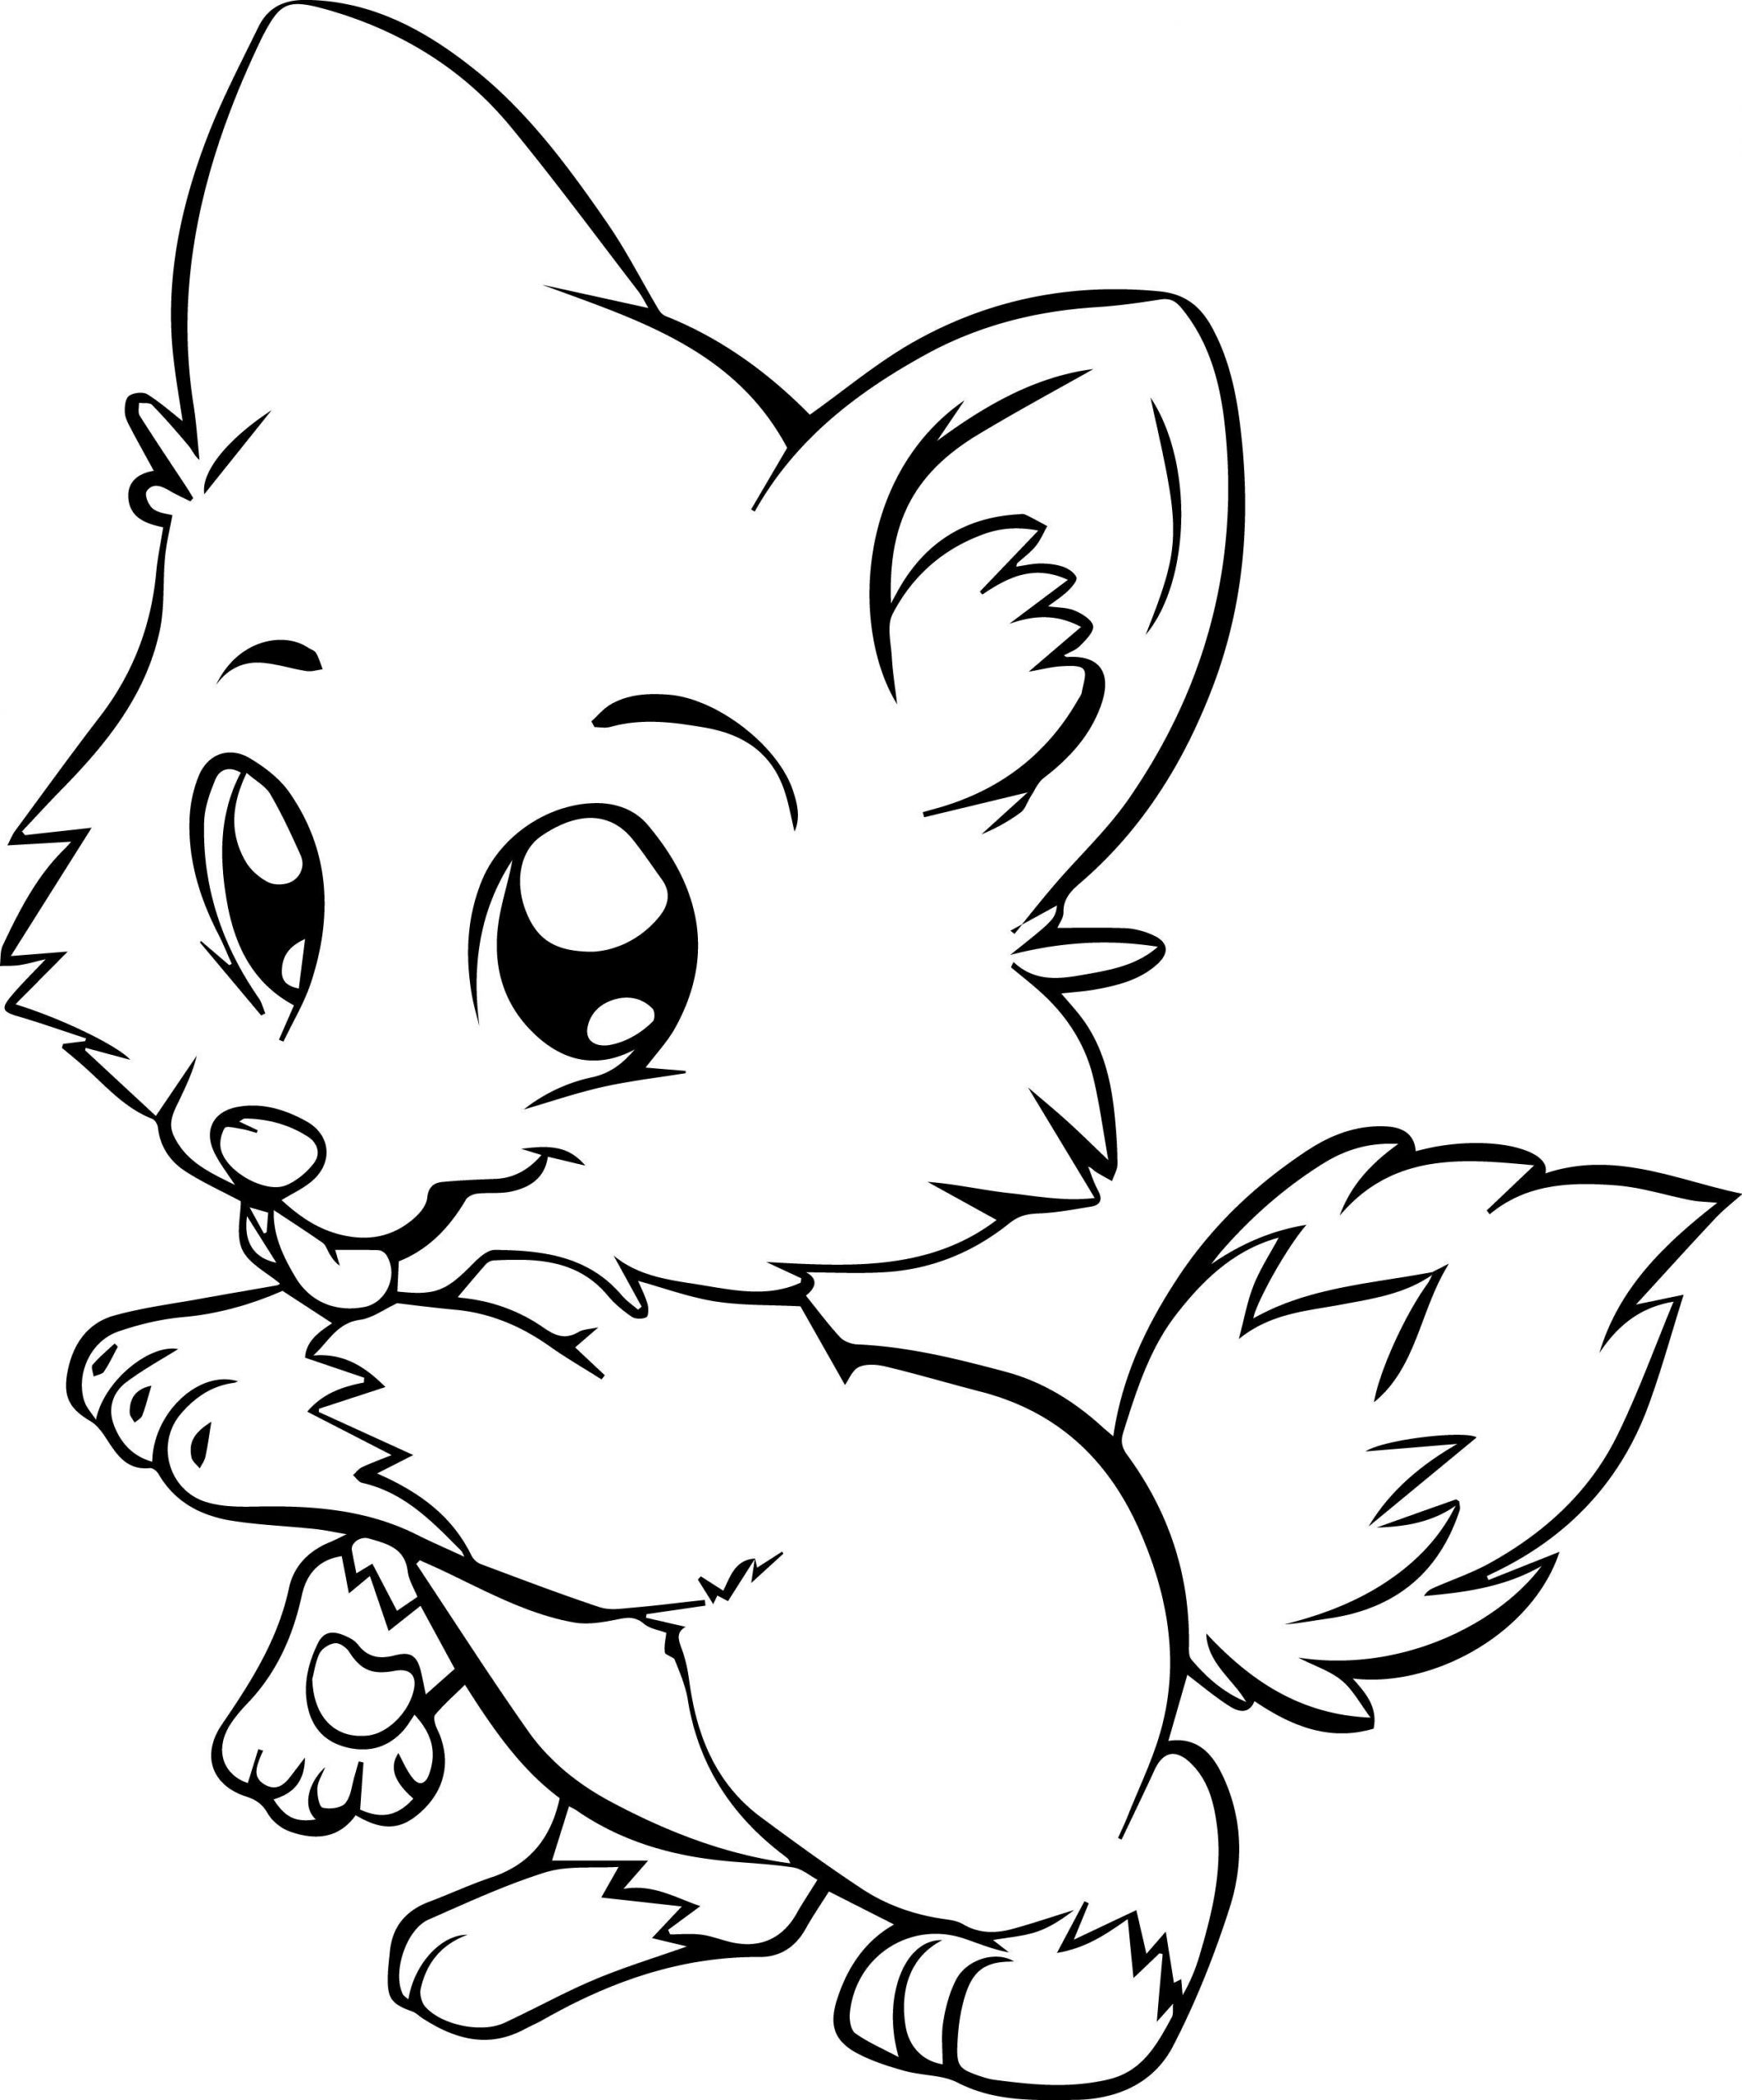 Animal Coloring Pages For Kids
 Animal Coloring Page Coloring Pages For Children